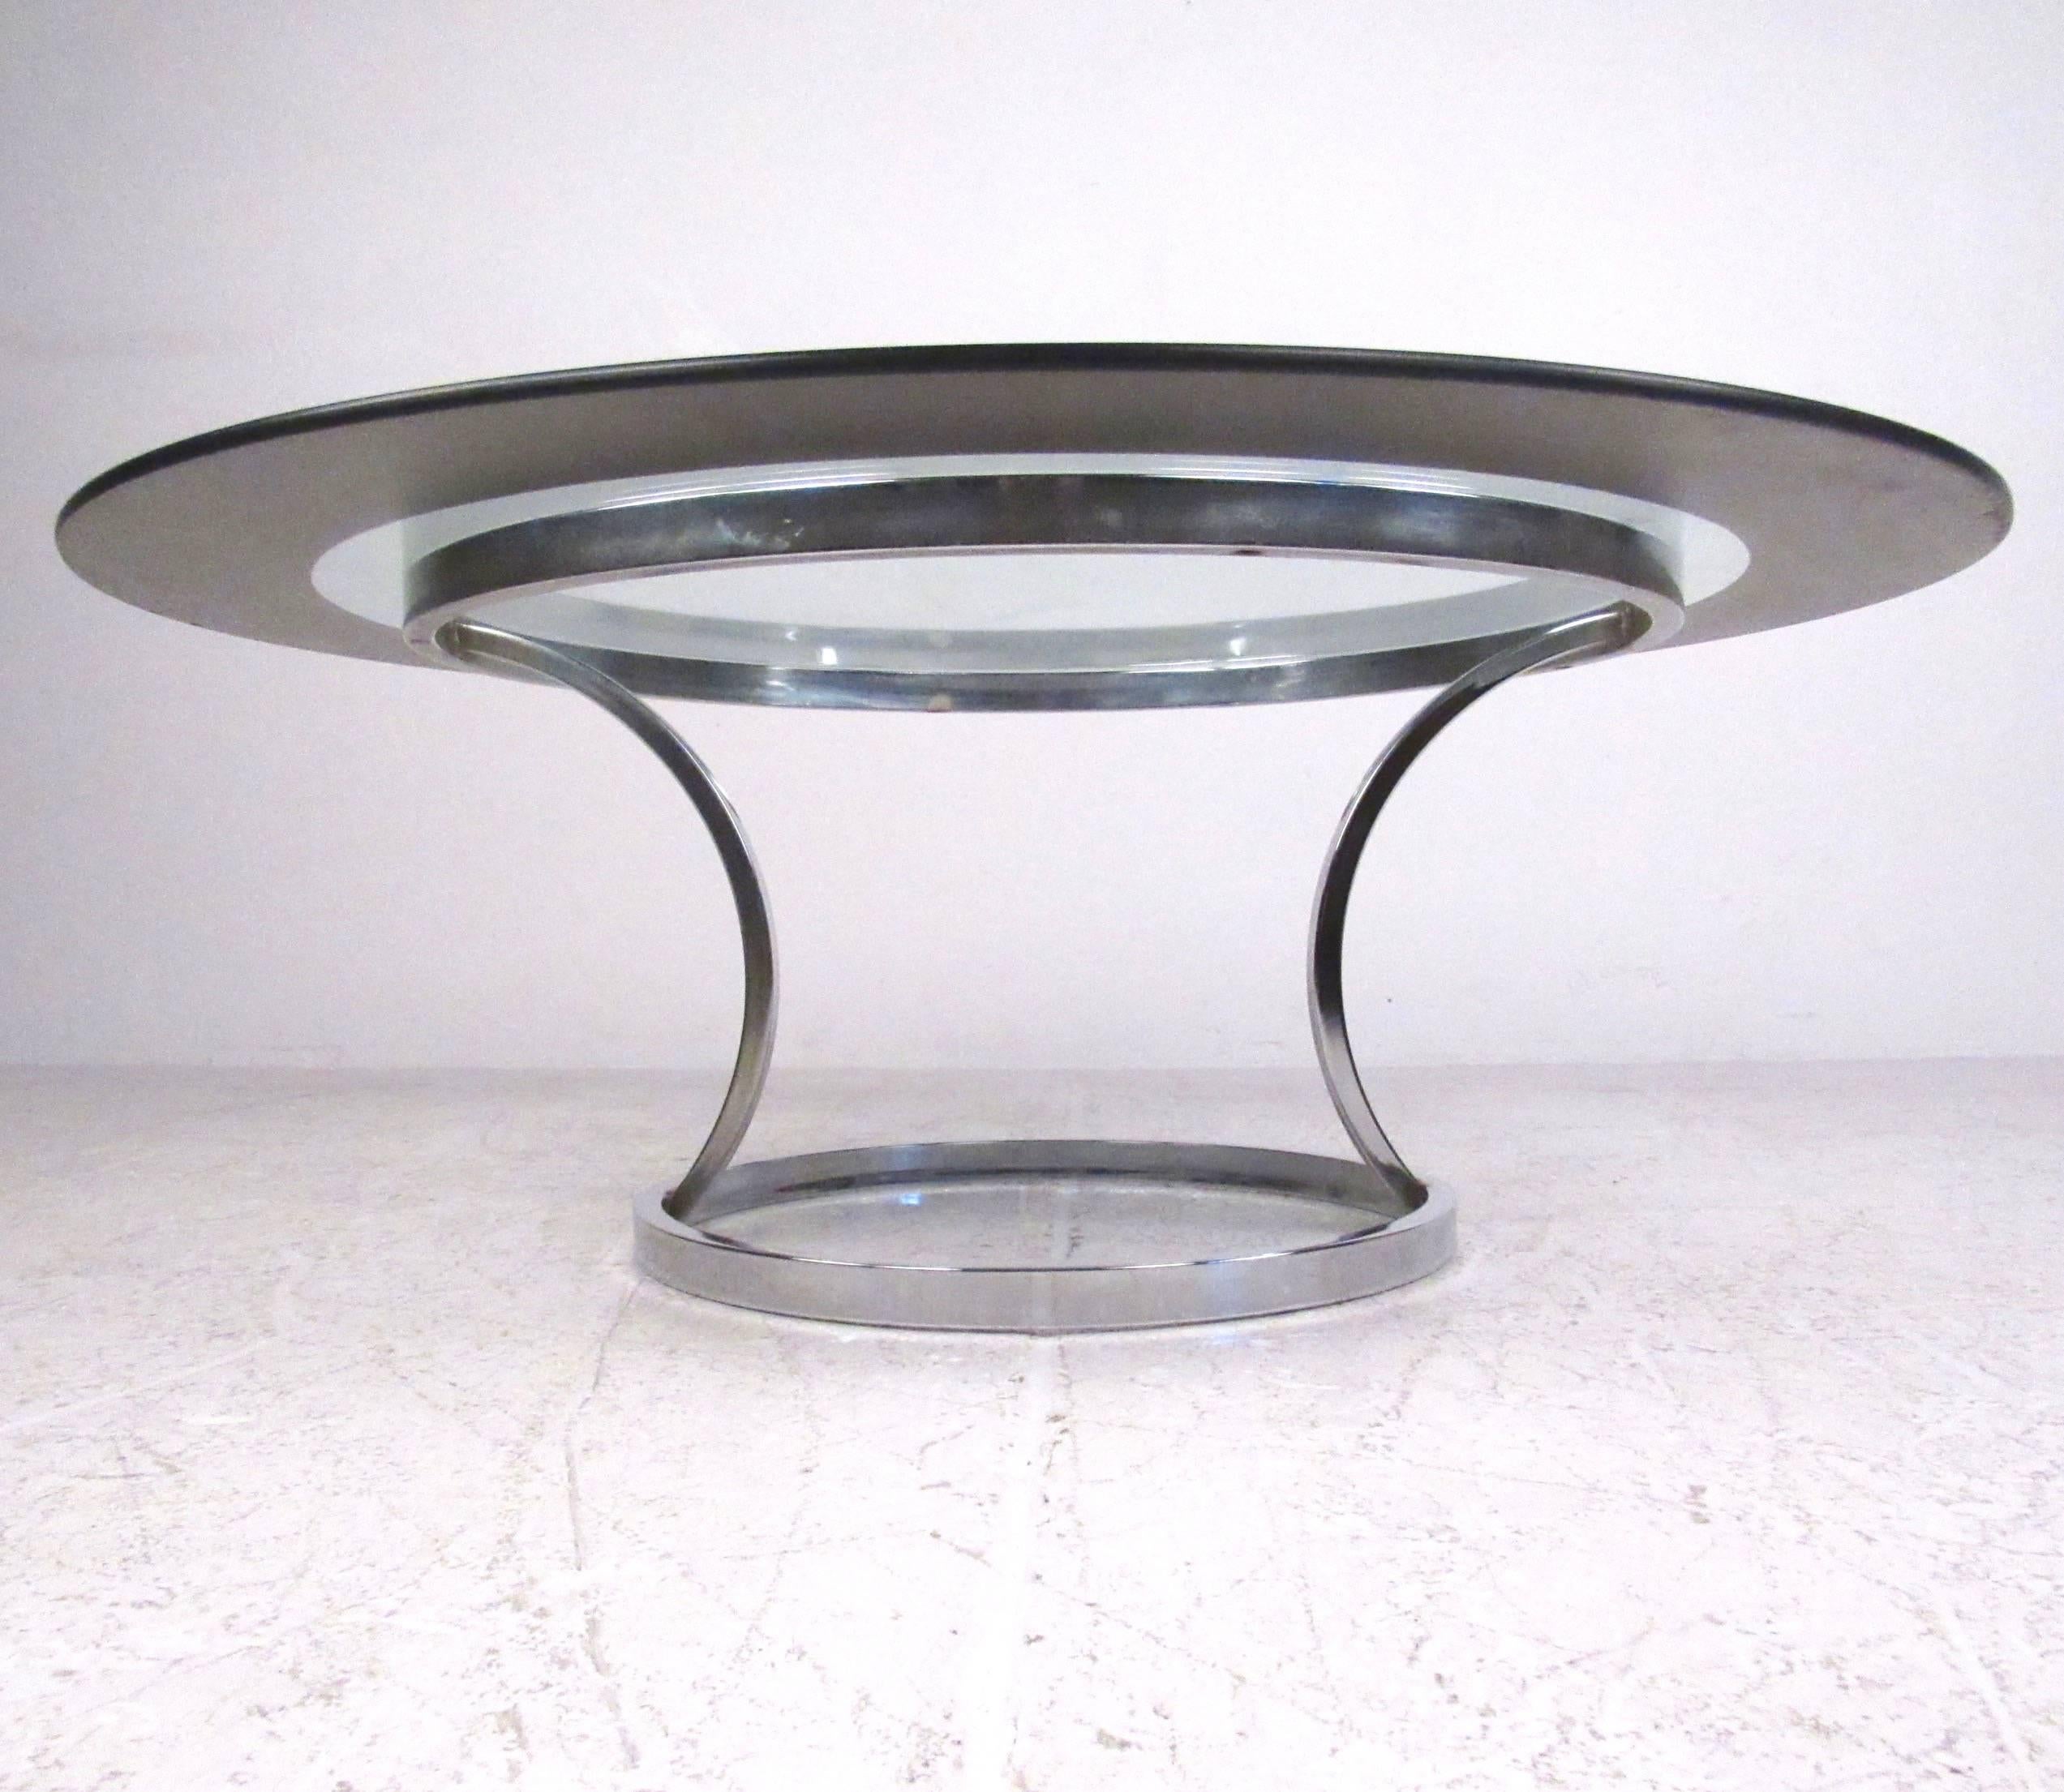 This vintage coffee table features a stylish chrome base with a circular glass top, complete with unique mirrored trim. Beautiful cocktail table from the mid-century era, this stunning modern piece makes the perfect addition to any interior. Please